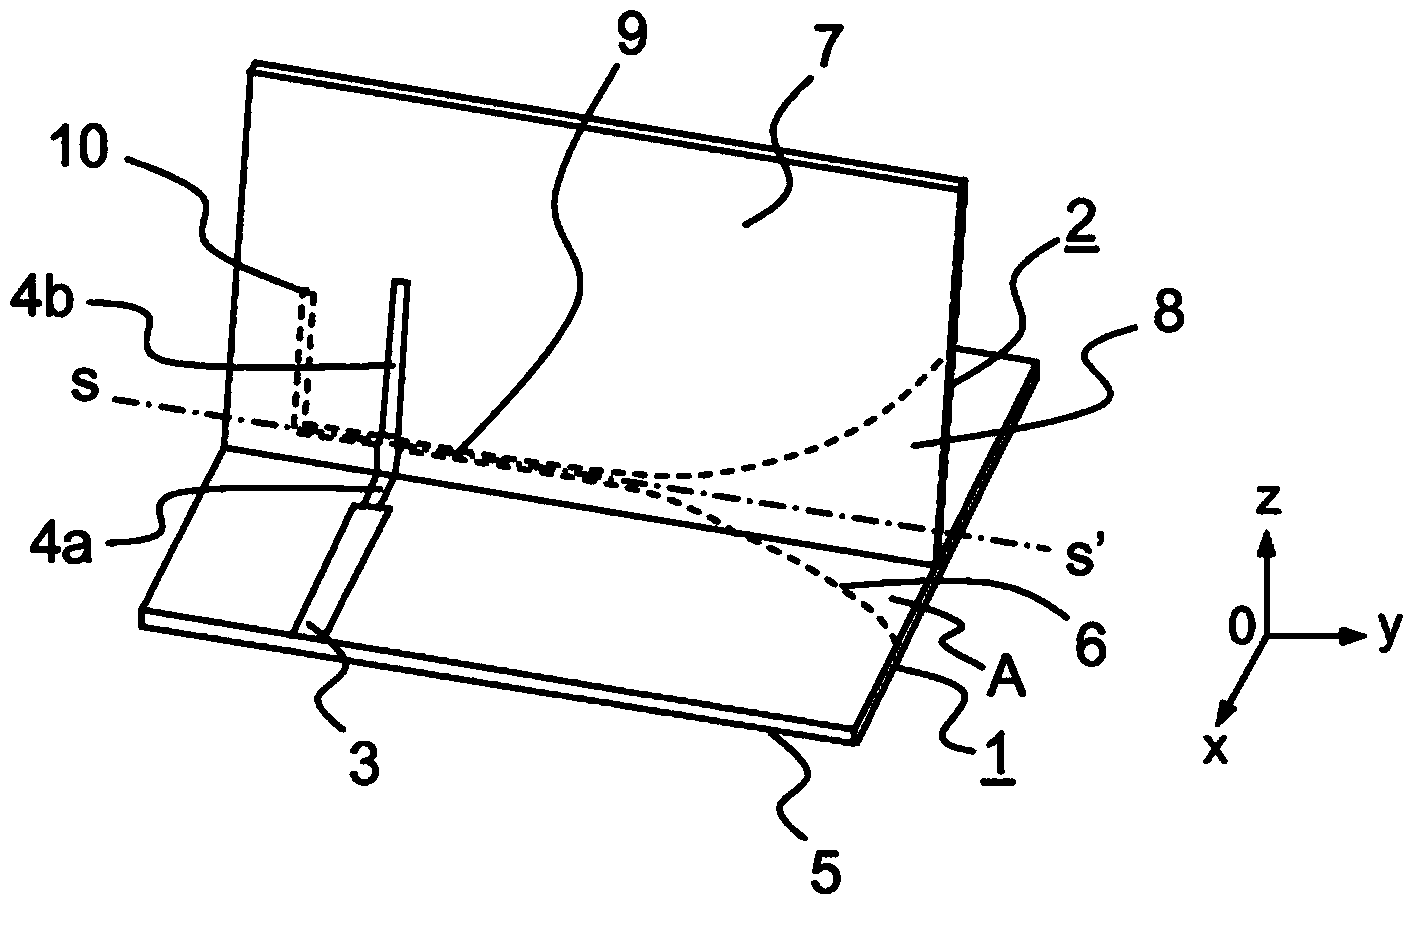 Printed slot-type directional antenna, and system comprising an array of a plurality of printed slot-type directional antennas